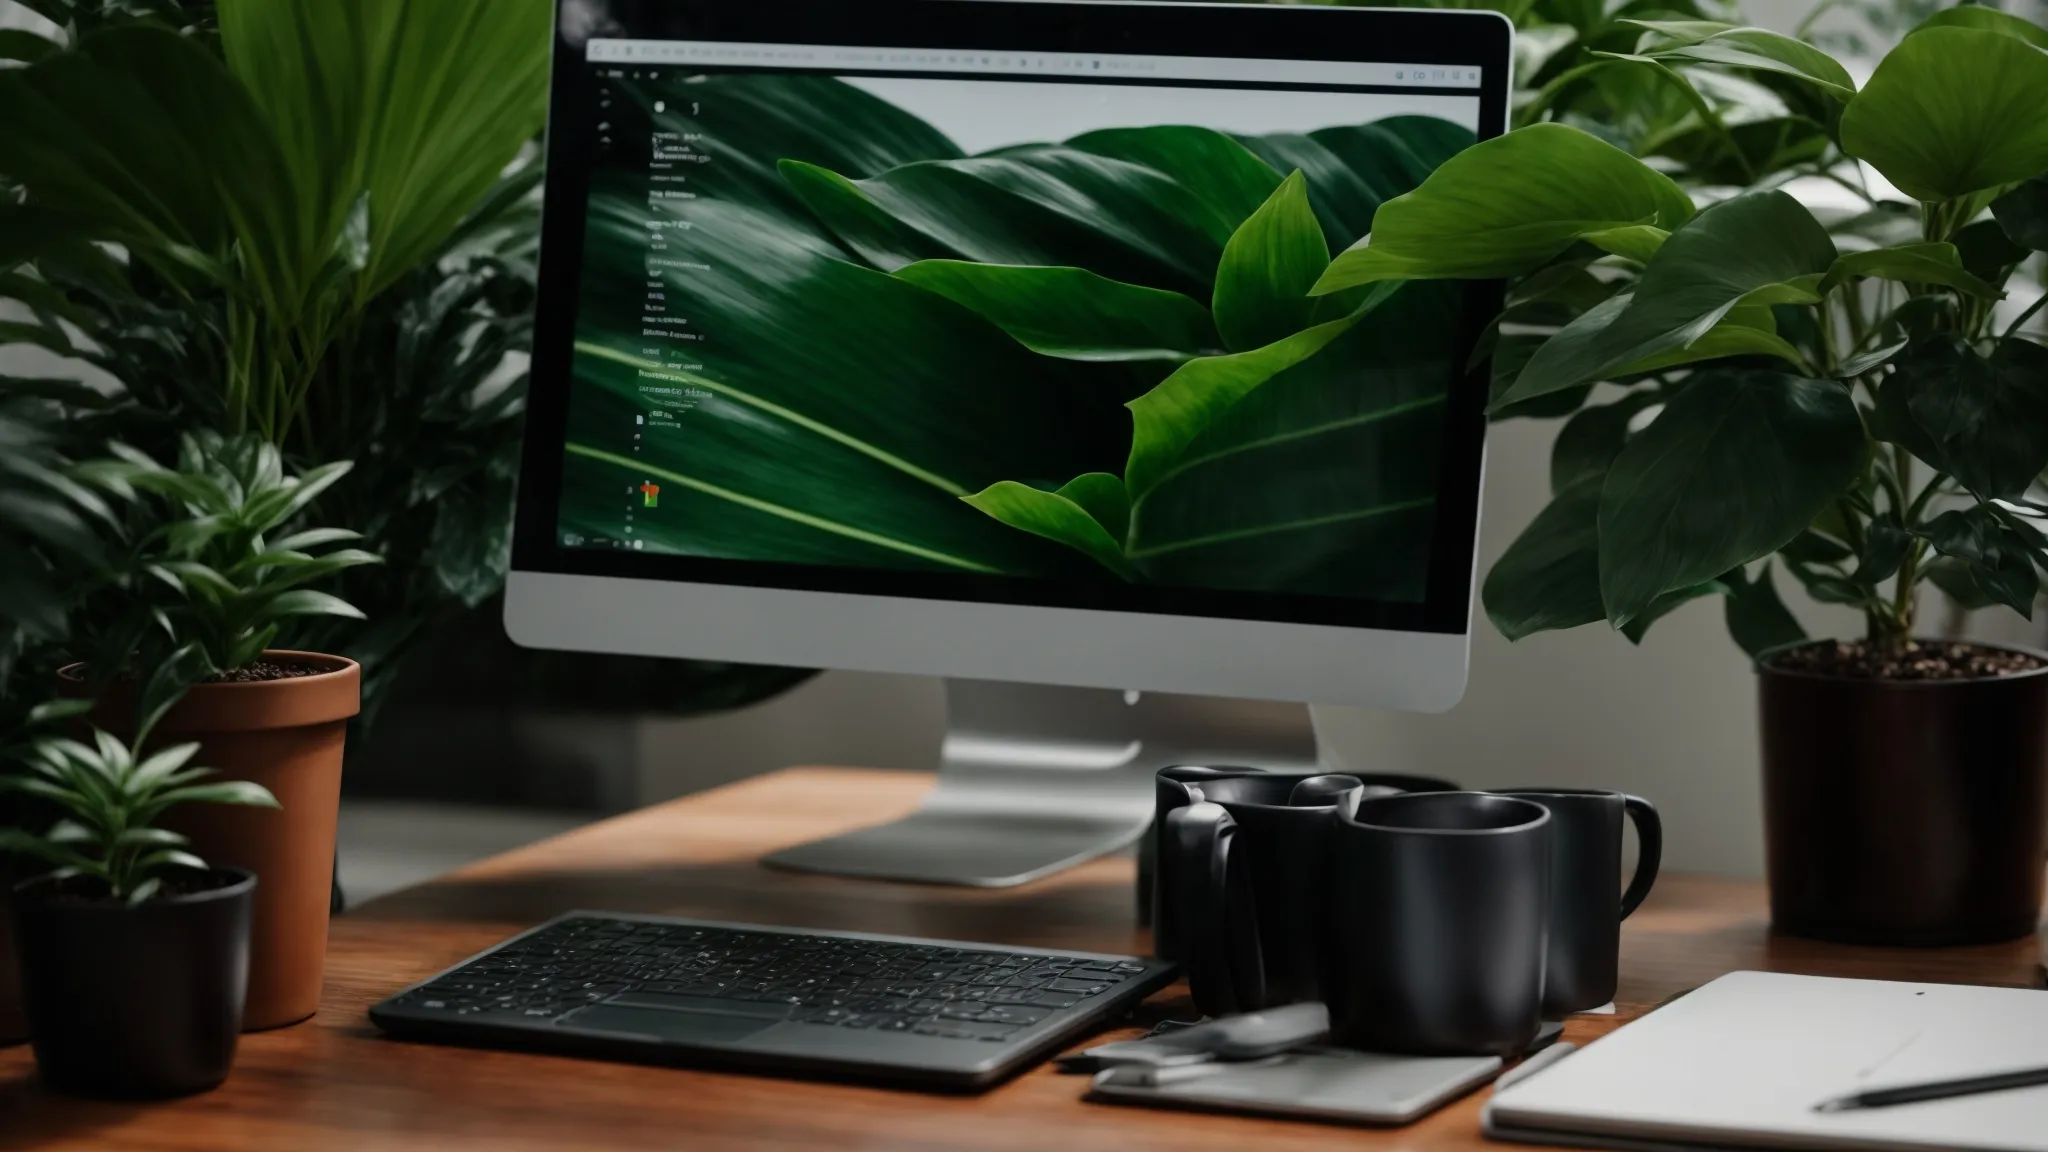 a laptop, coffee mug, and notepad on a workspace with a green plant in the background.